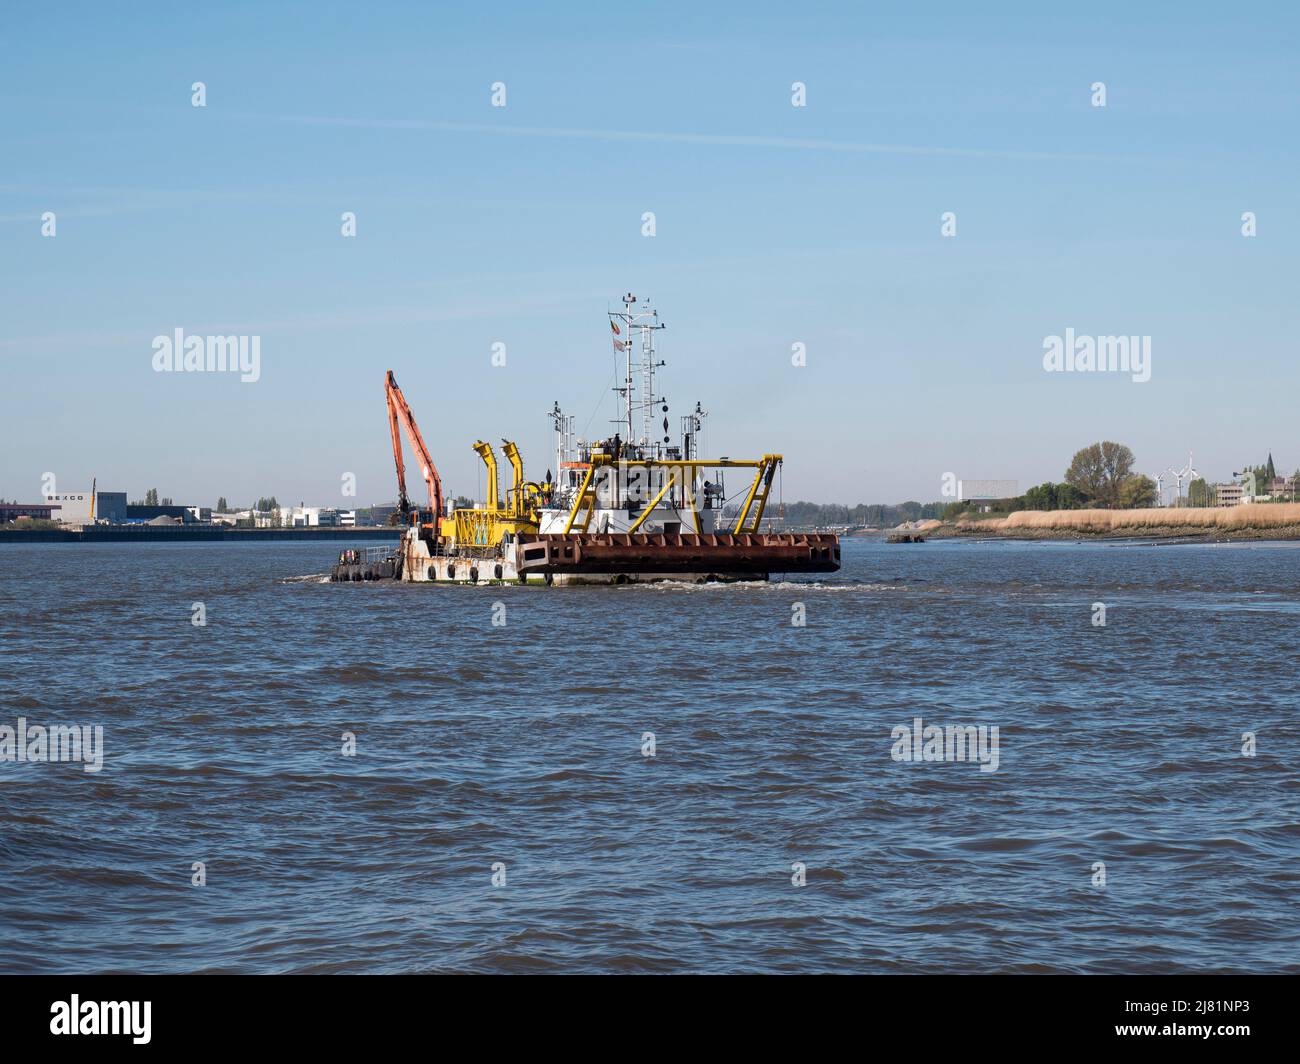 Antwerp, Belgium, 17 April 2022,The vessel PIETER COECKE is a Dredger vessel, built in 1992 and sailing under the flag of Belgium, sailing on the Sche Stock Photo